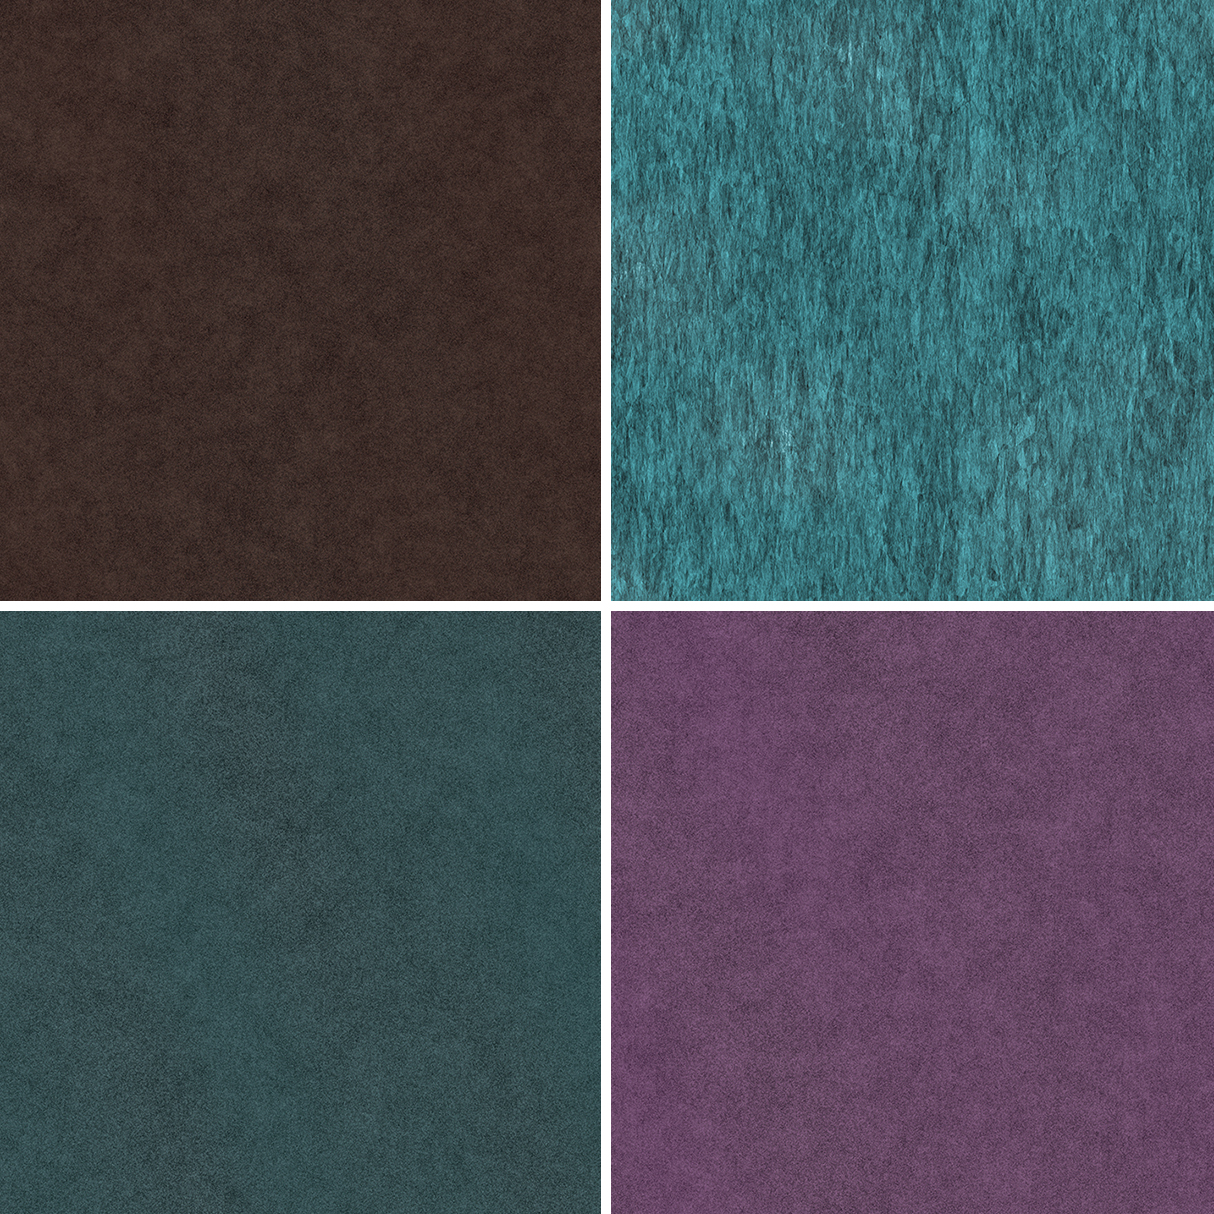 30 Suede Background Textures Samples – Part 4